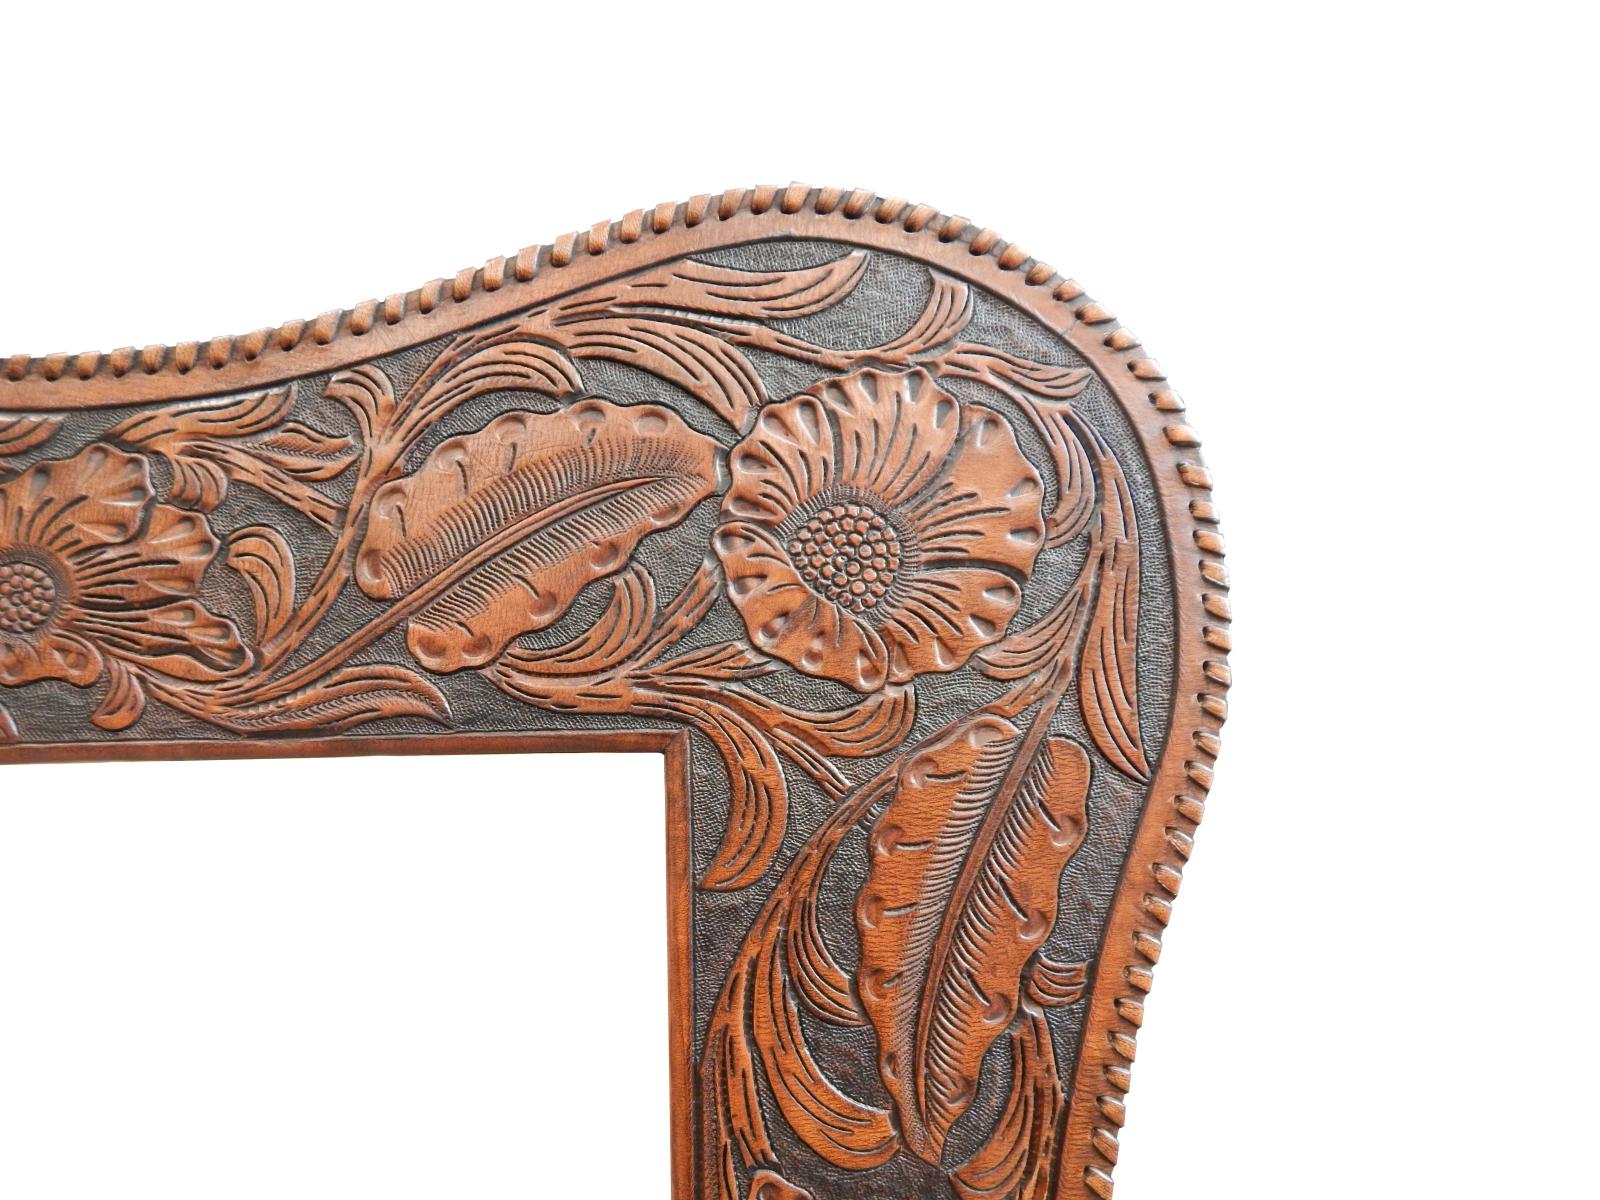 leather frames western hand tooled/tooling floral wyoming design with Serpentine shape, hand stitch edge lacing